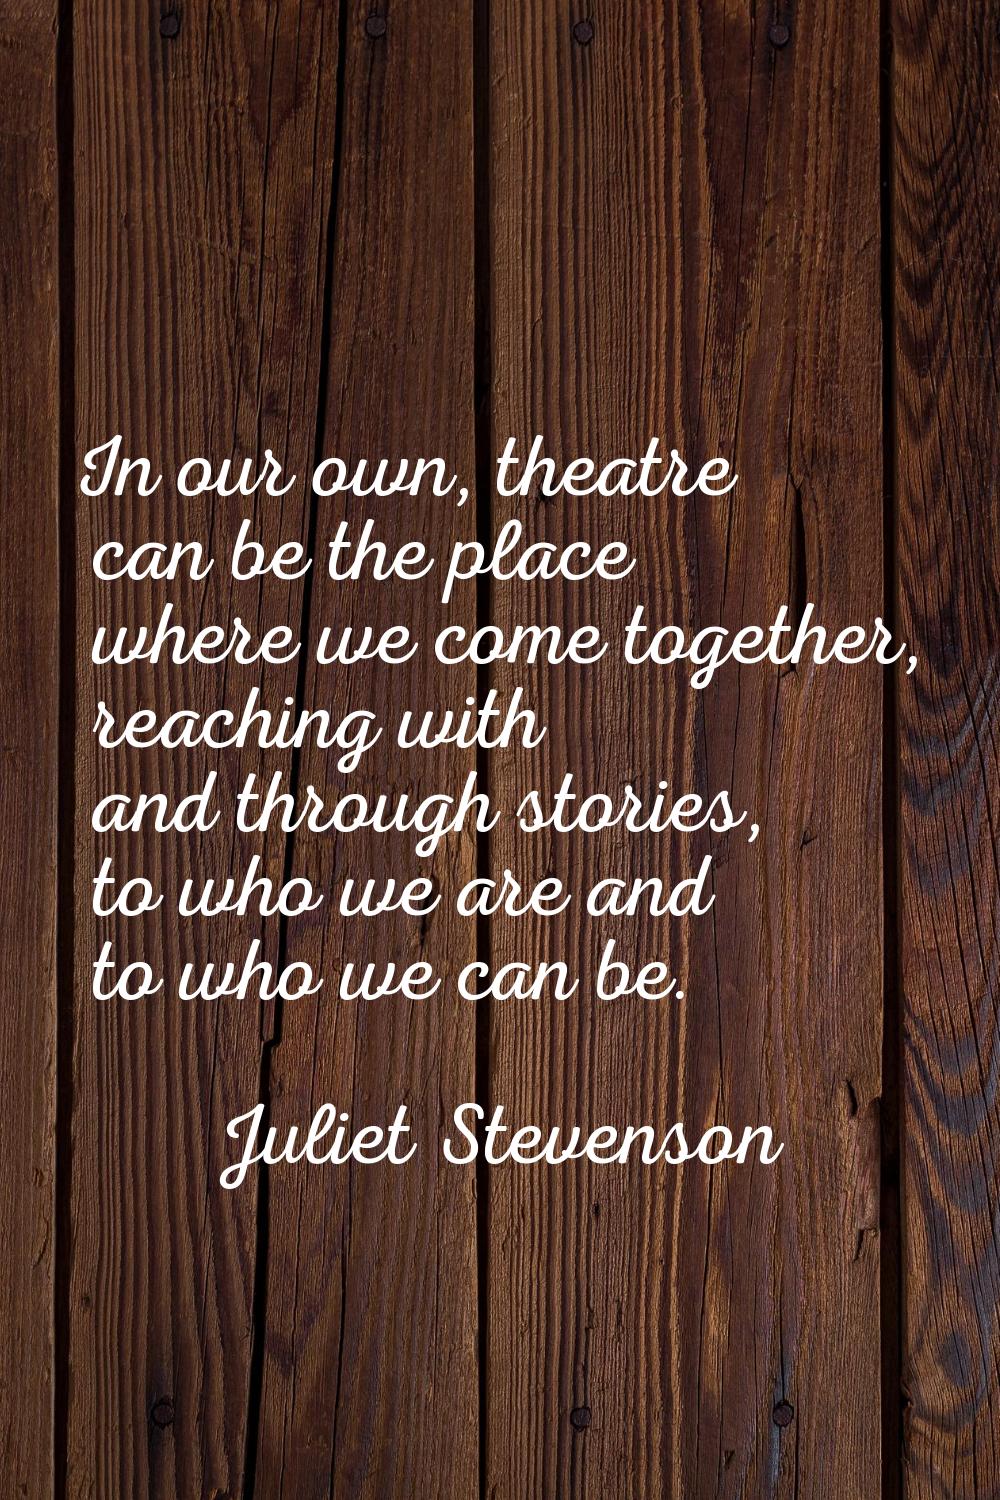 In our own, theatre can be the place where we come together, reaching with and through stories, to 